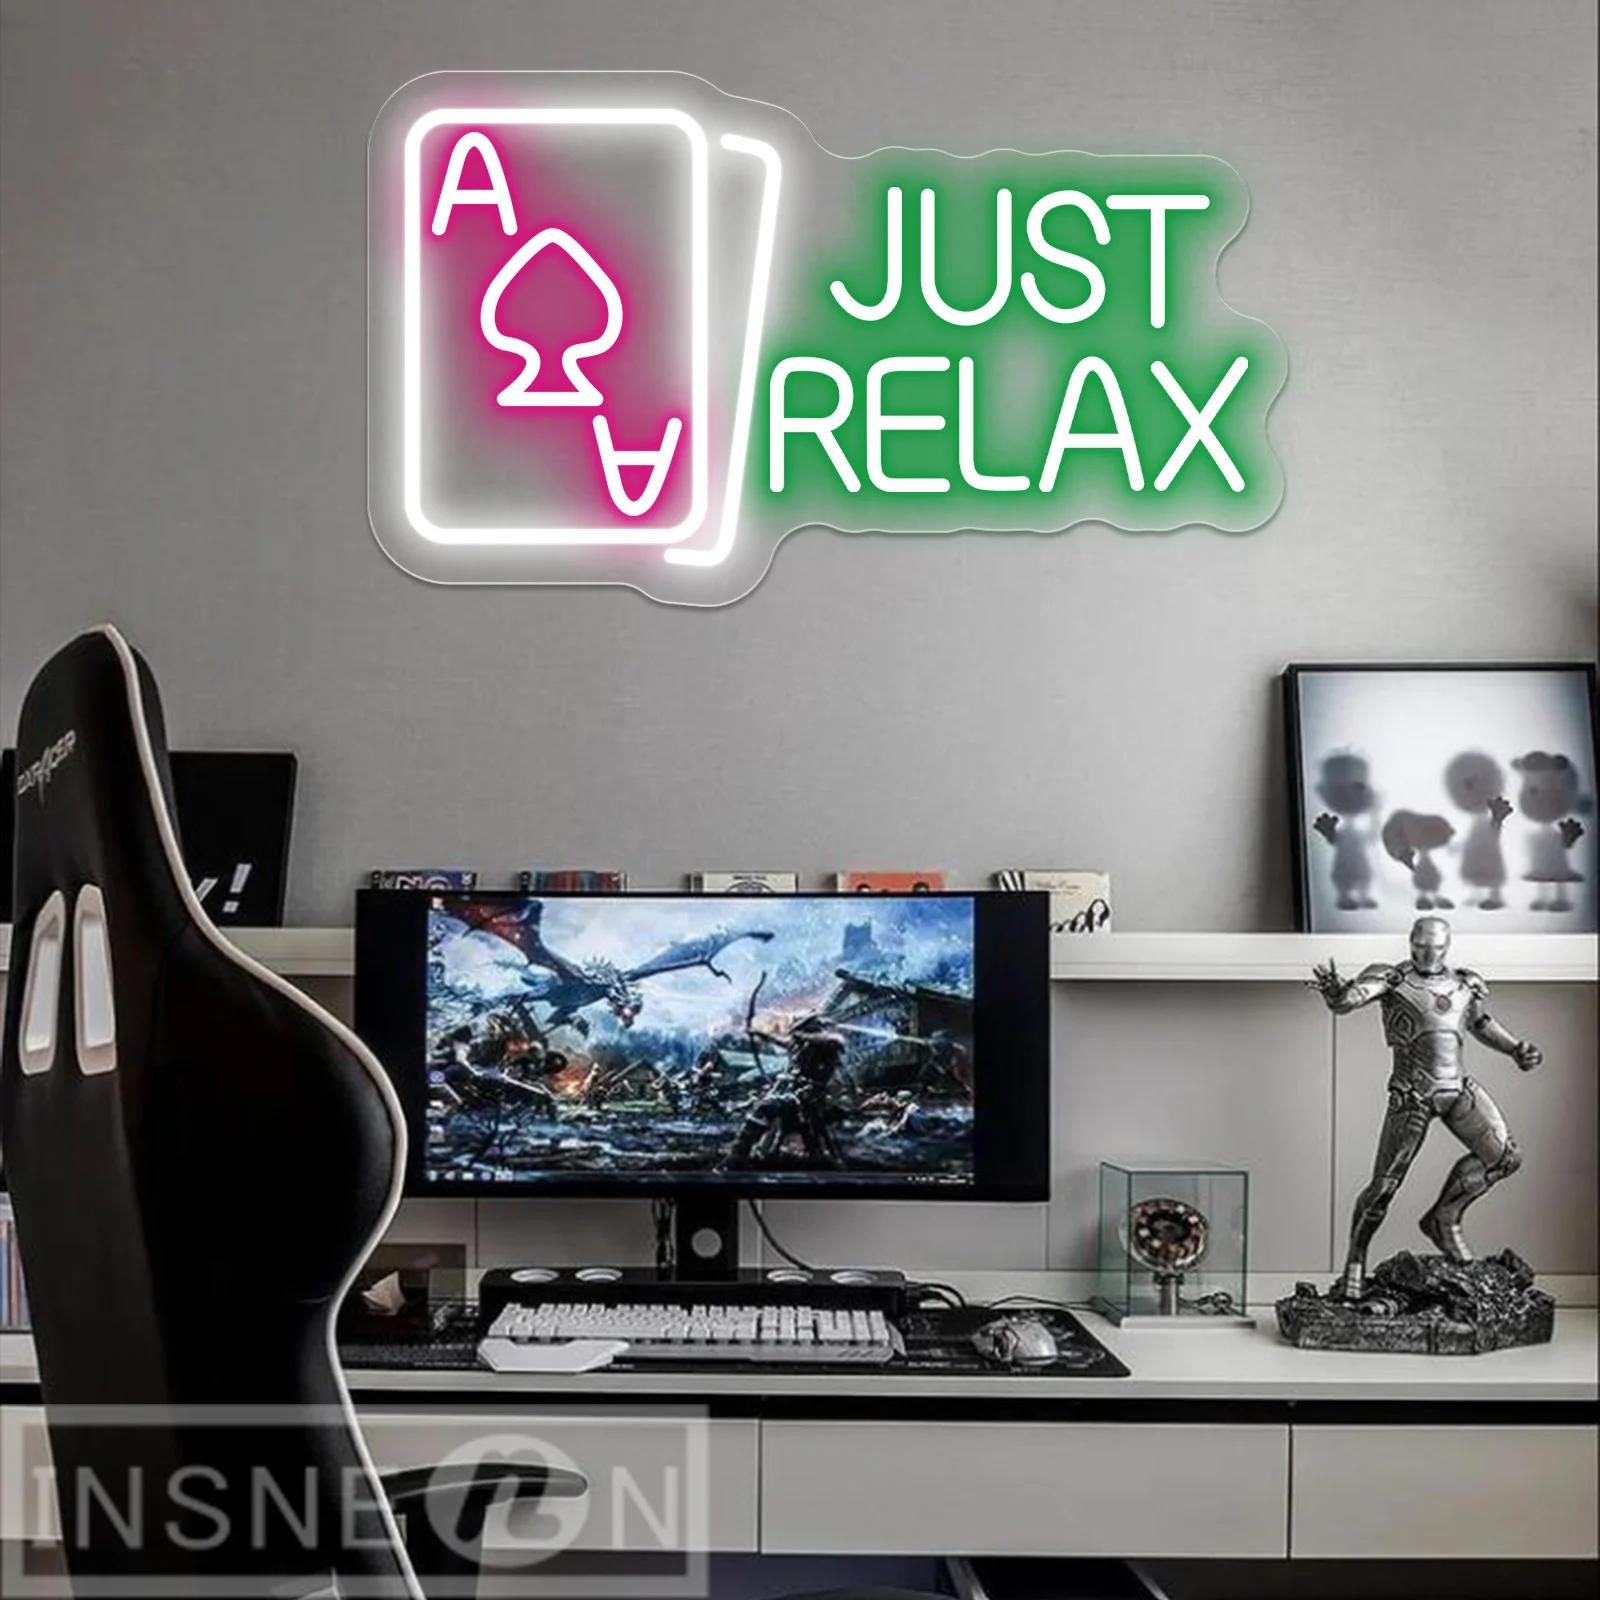 

Neon Sign Led Lights Just Relax Beer Bar Club Men's Cave Neon Signs Wall Decor Art Hotell Bar Cafe Neon Lights 5V USB Power With